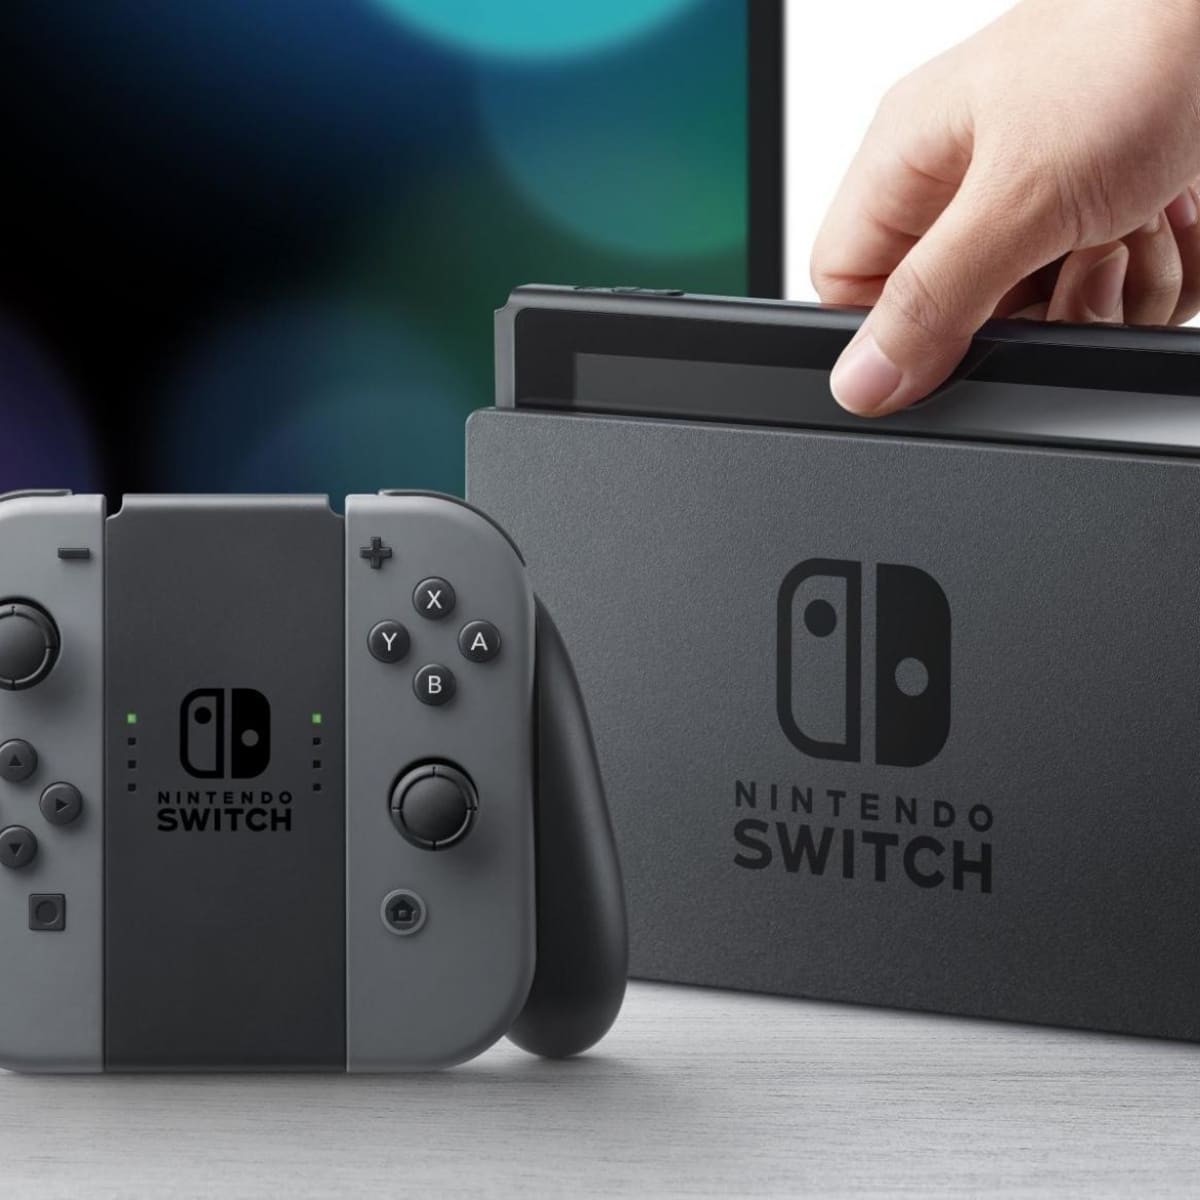 Why I Think Wii U Was Better Than Switch - HubPages